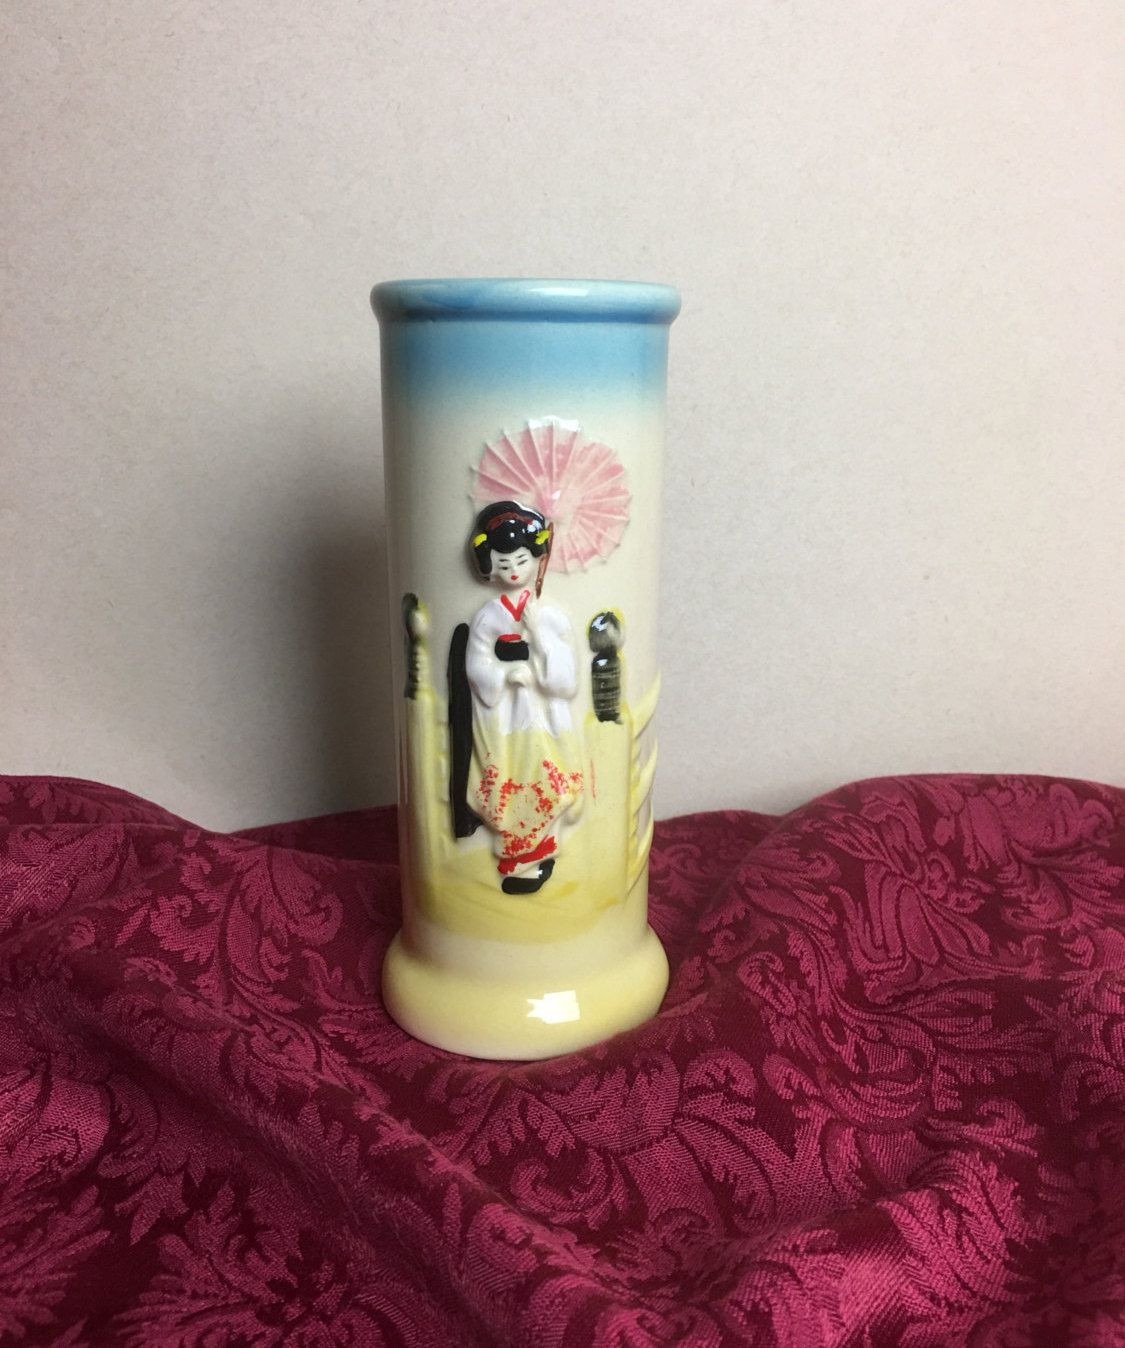 19 Recommended Lenox Bud Vase Gold Trim 2024 free download lenox bud vase gold trim of vintage omc asian vase with 3d geisha girl otagiri japan by anaforia pertaining to vintage omc asian vase with 3d geisha girl otagiri japan by anaforia on etsy